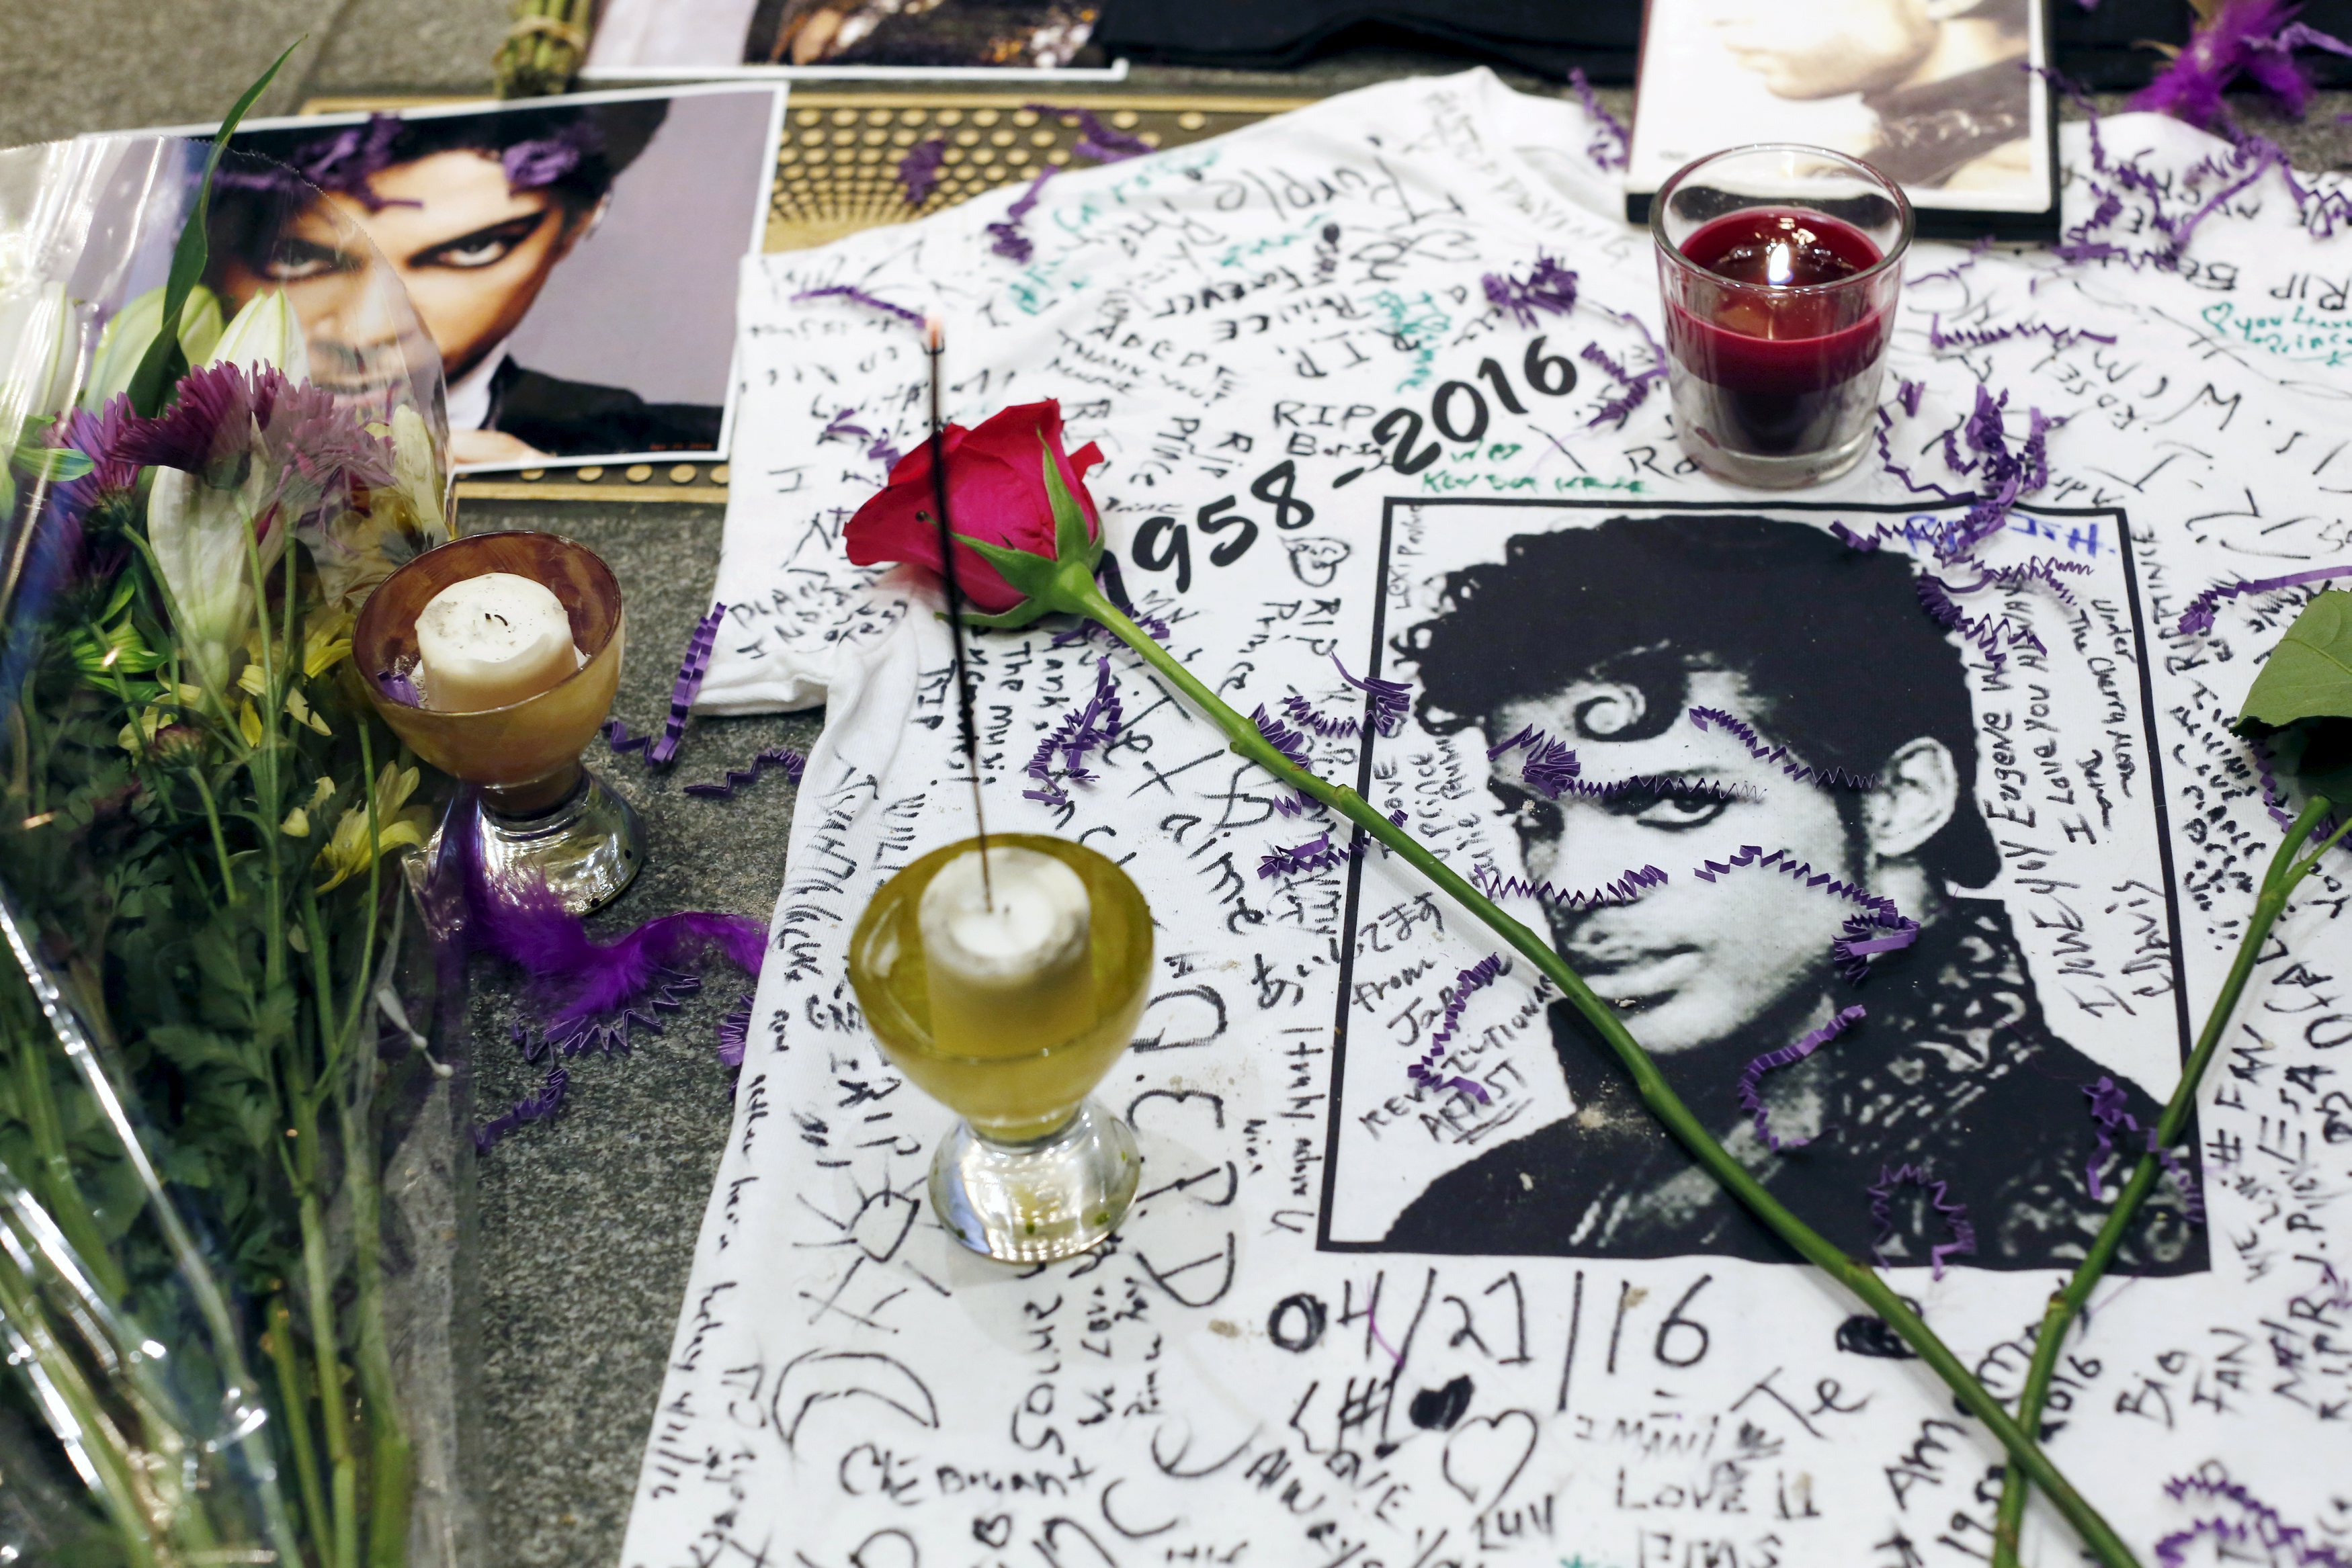 Autopsy performed on US music legend Prince